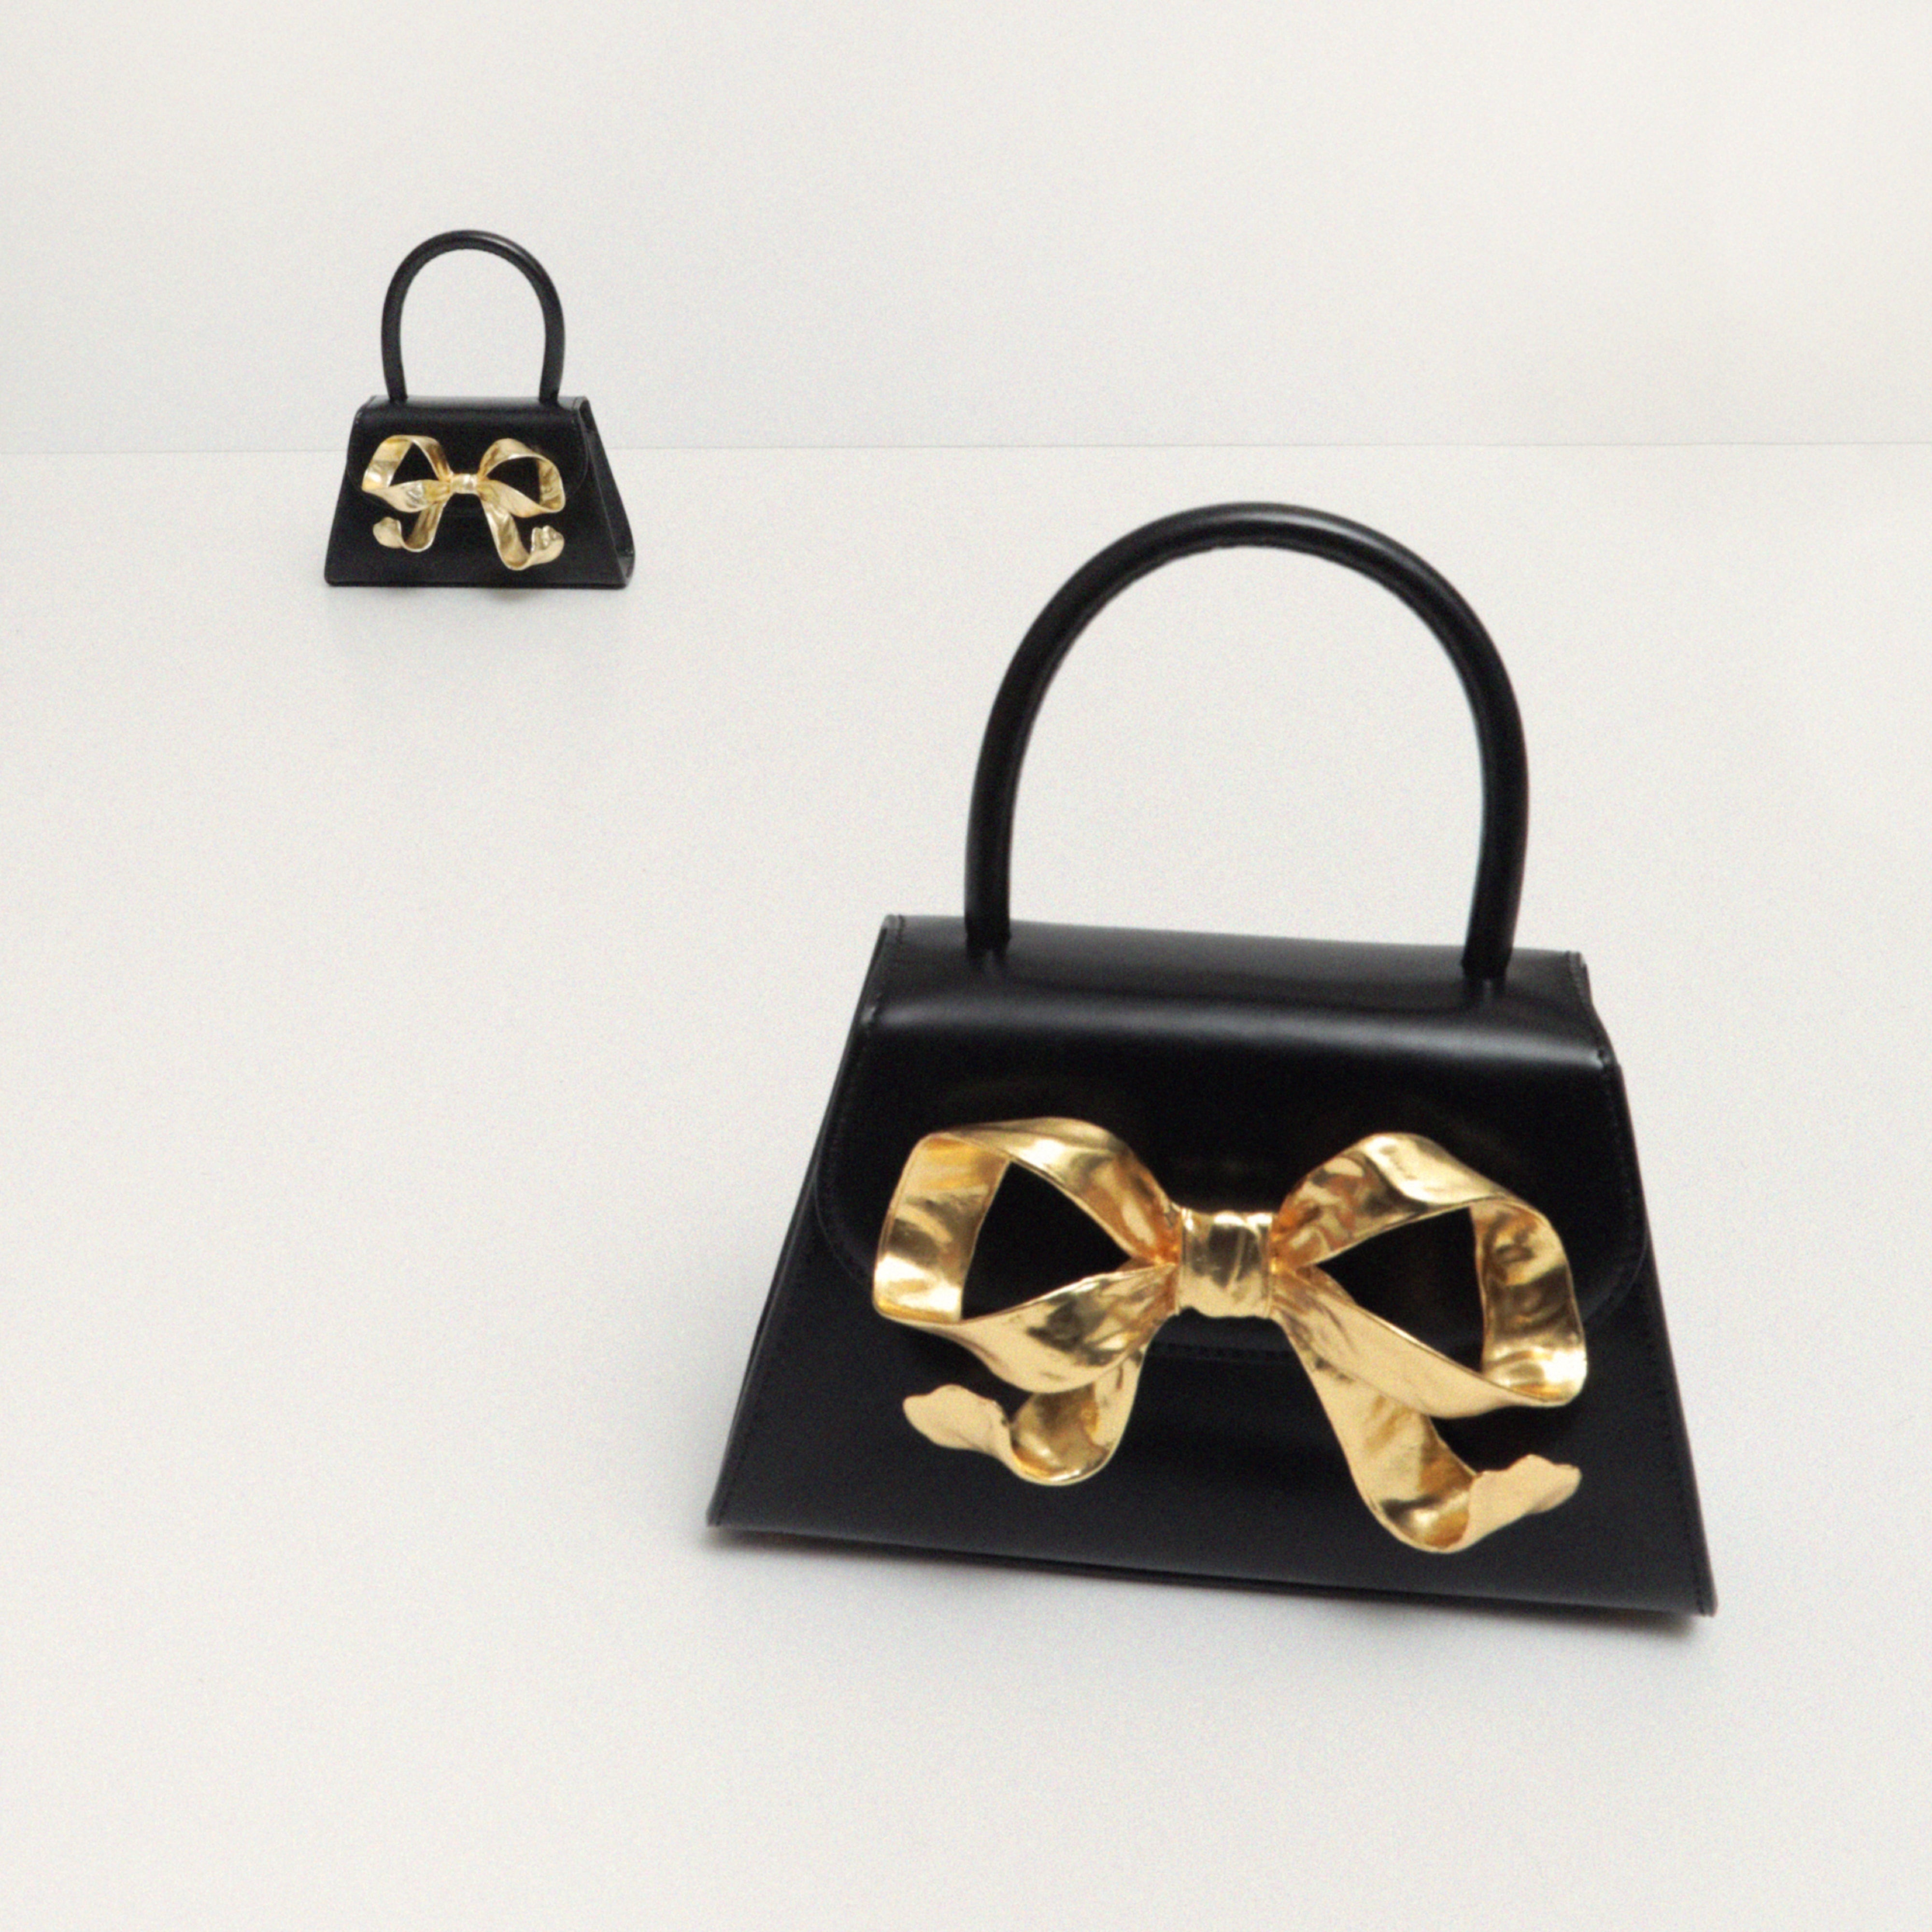 The Bow Micro in Black with Gold Hardware - 5